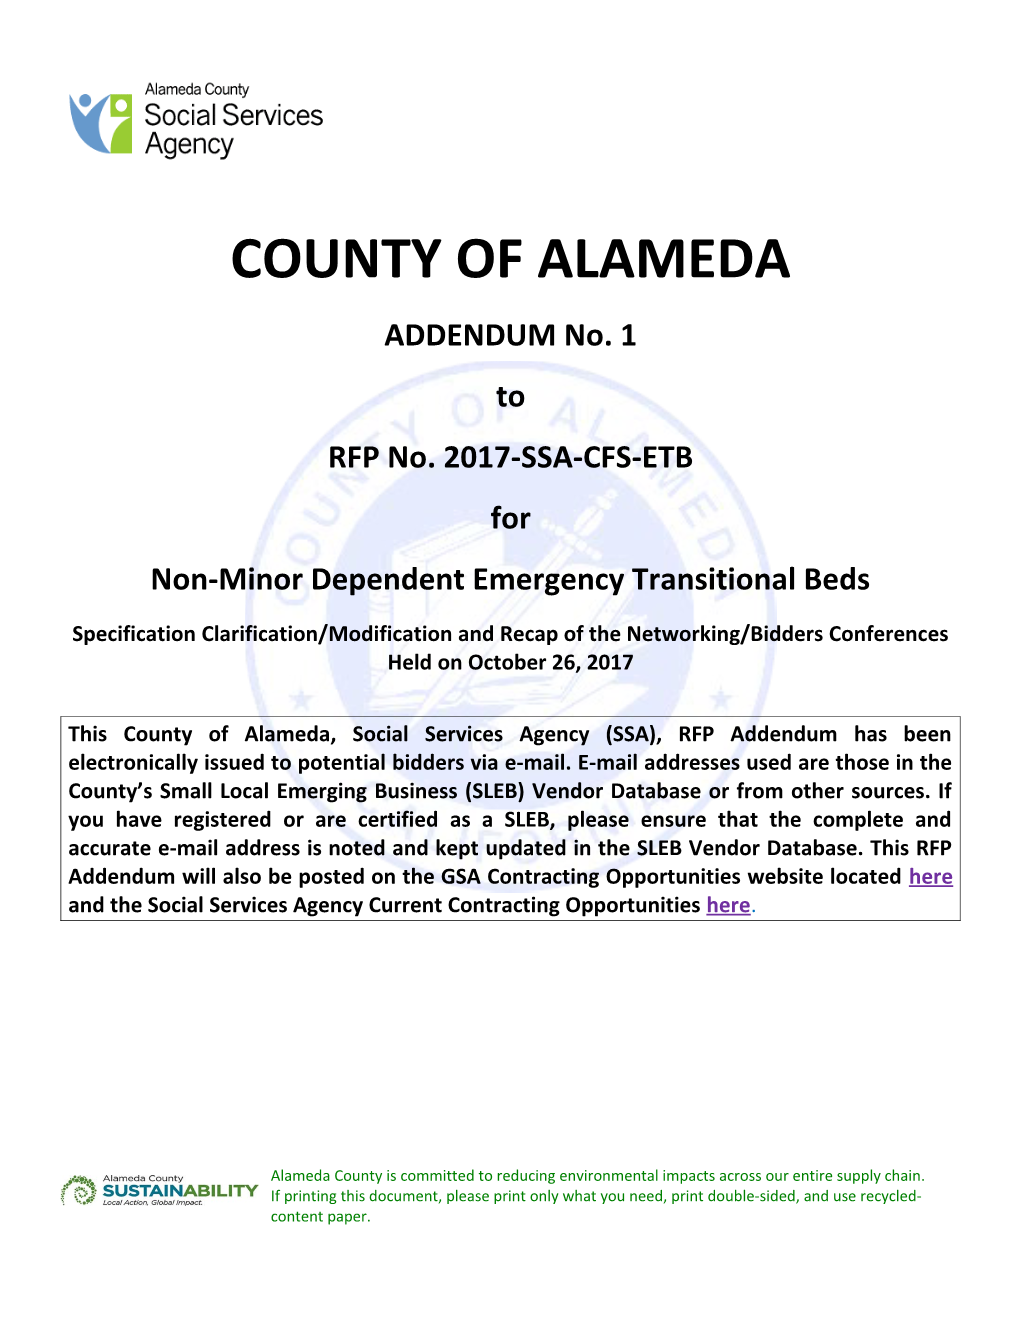 County of Alameda s22